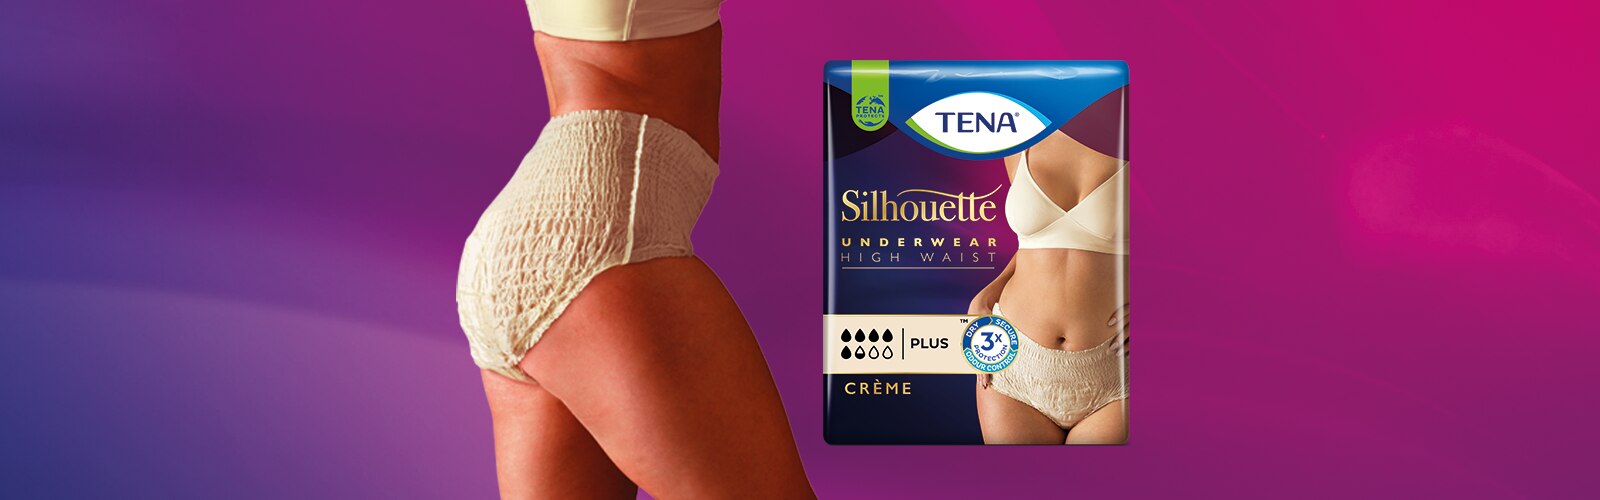 Woman puts on slimming underwear to improve body silhouette